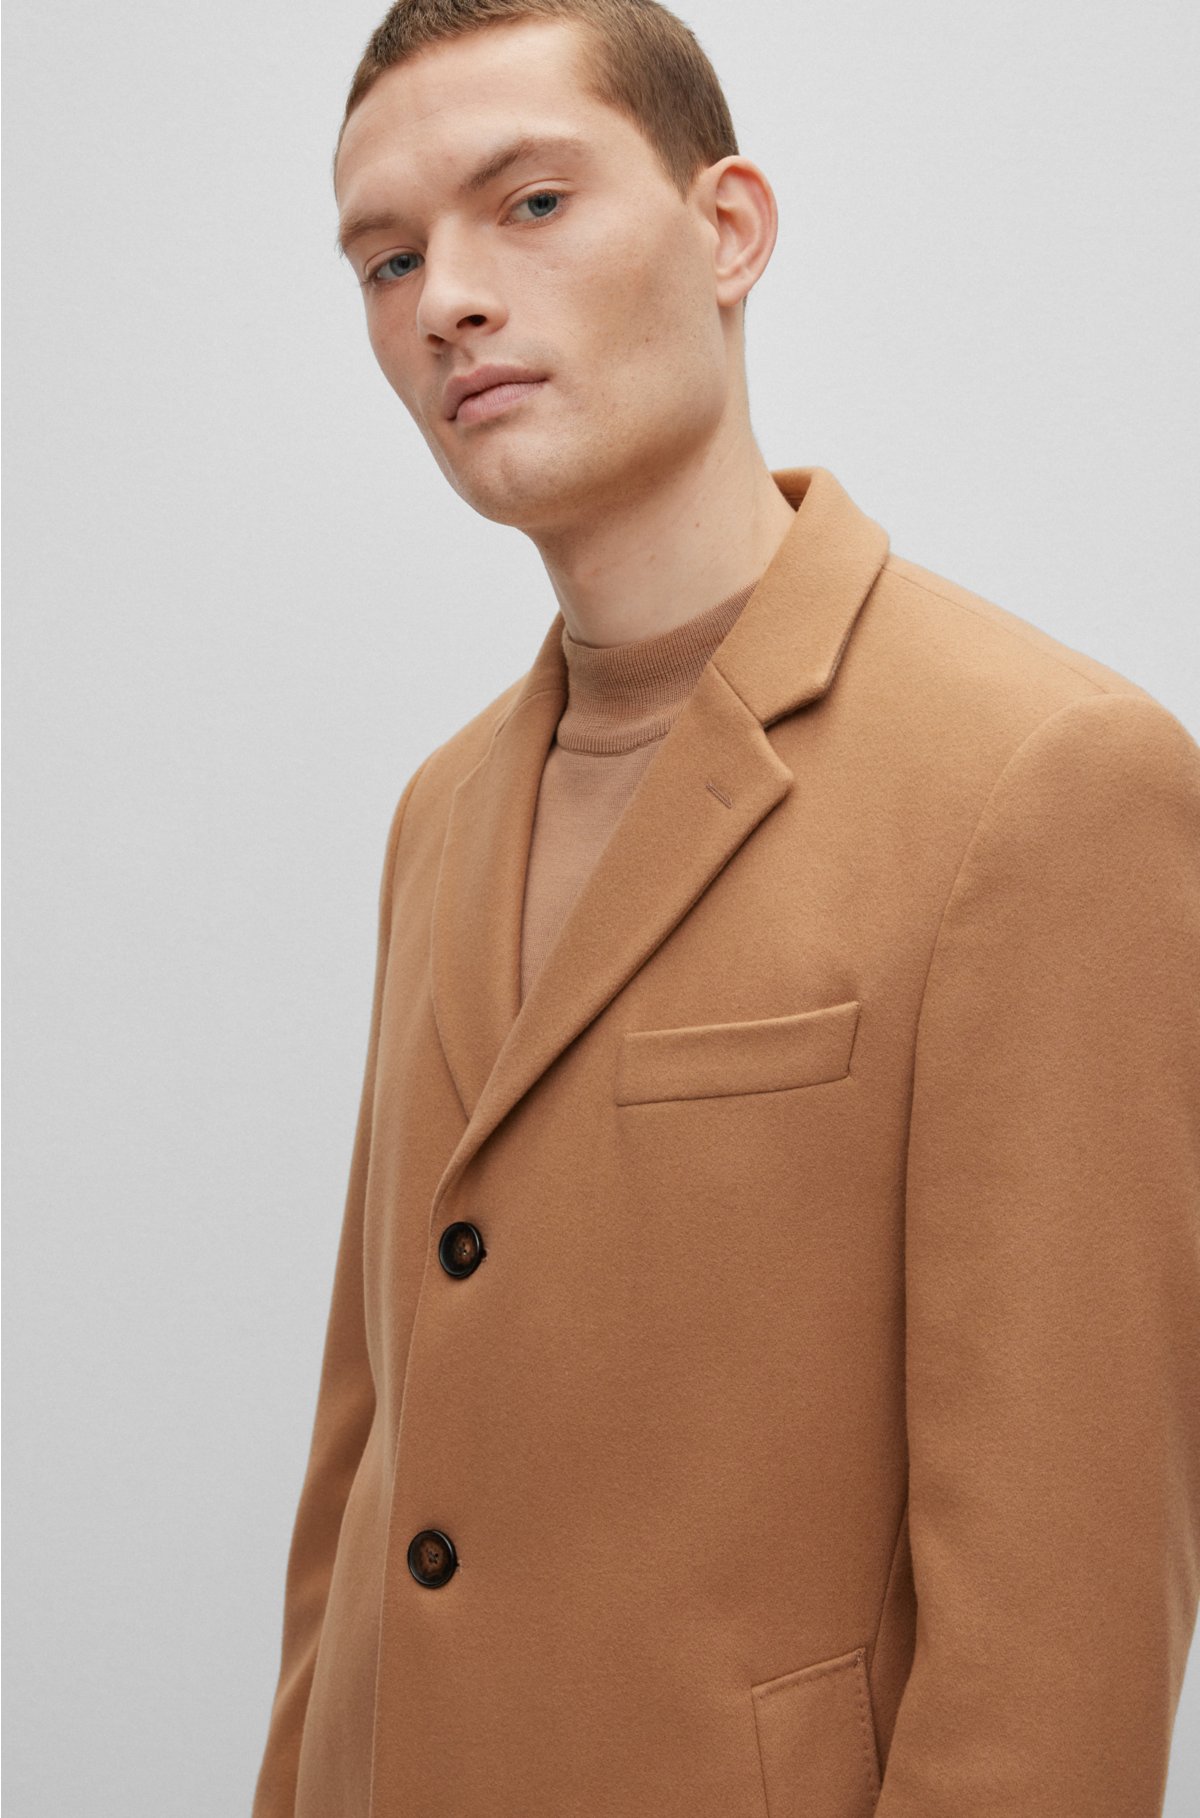 H&M Men's Double-Breasted Wool-Blend Coat